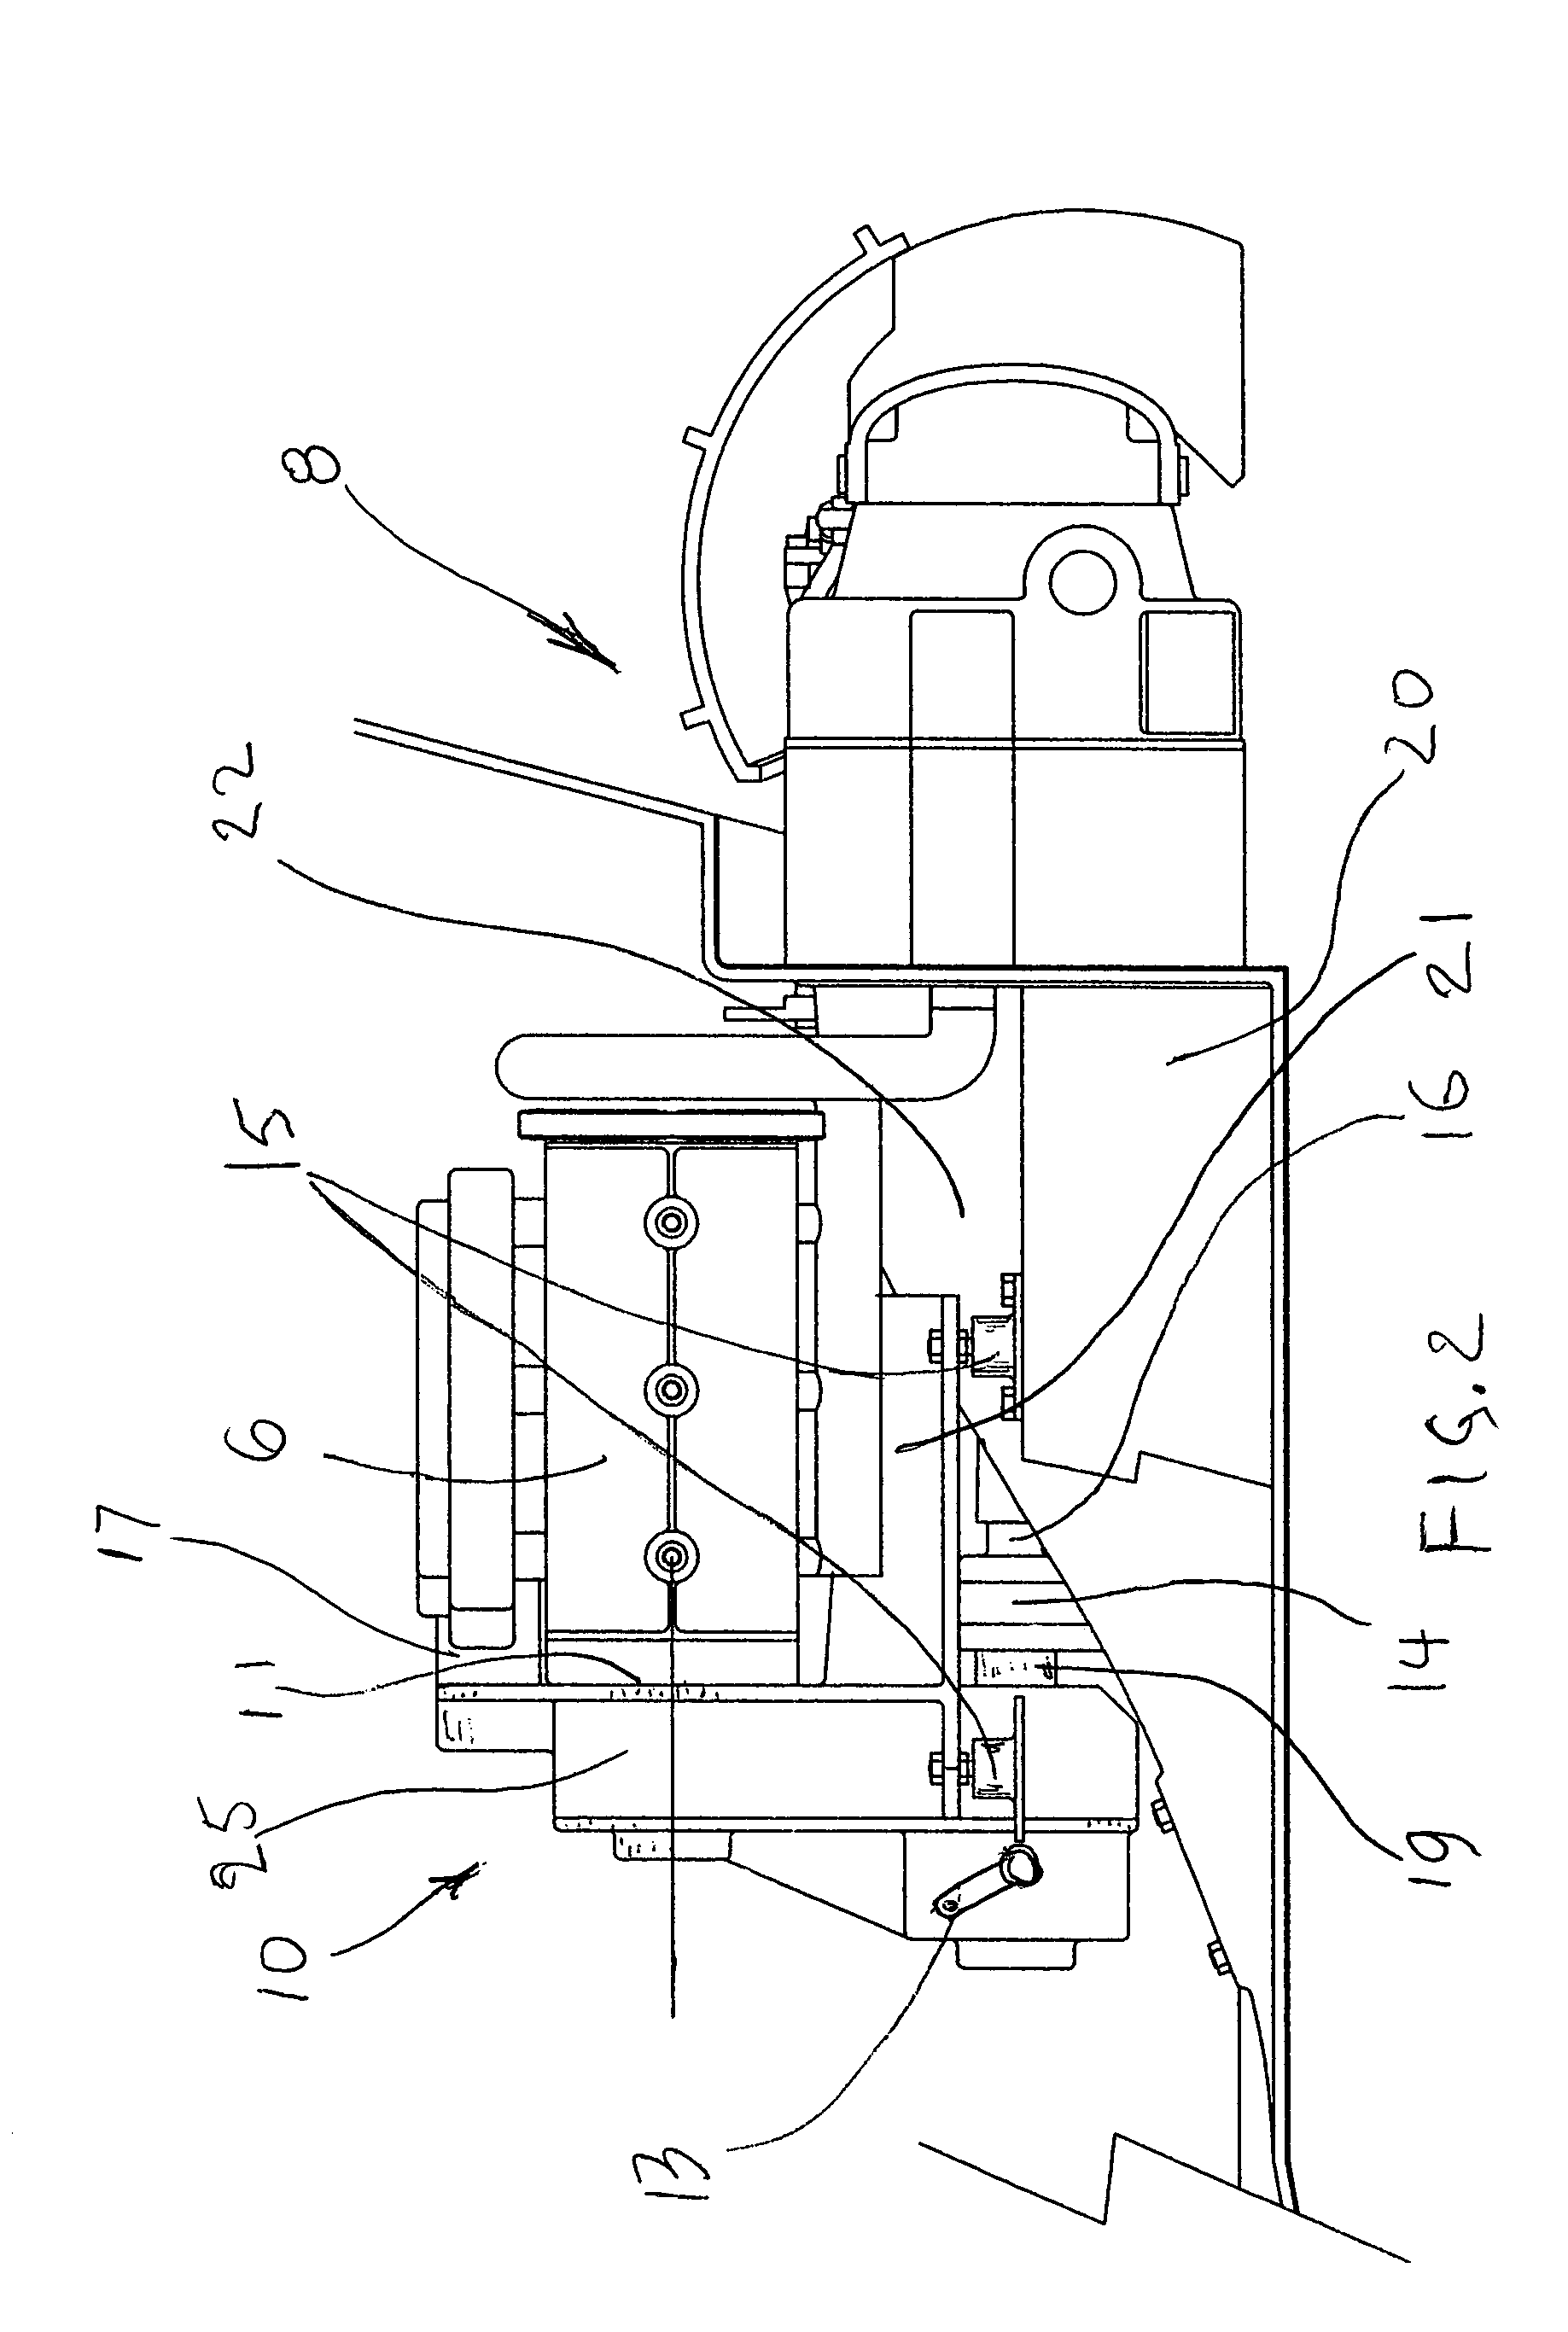 Integrated marine motor support and transmission apparatus